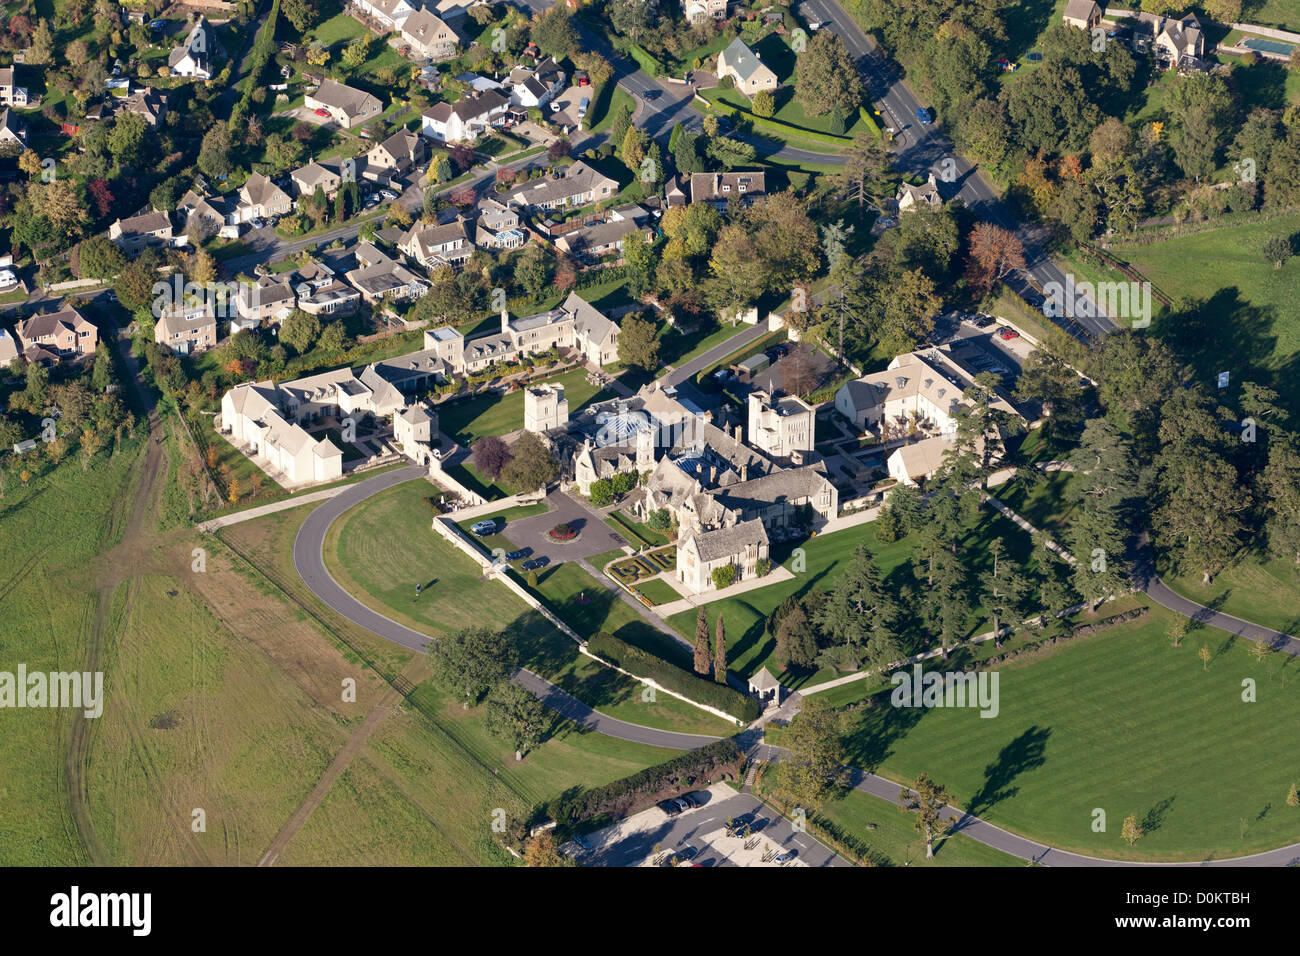 An aerial view of Ellenborough Park Hotel, Southam, Gloucestershire, UK Stock Photo